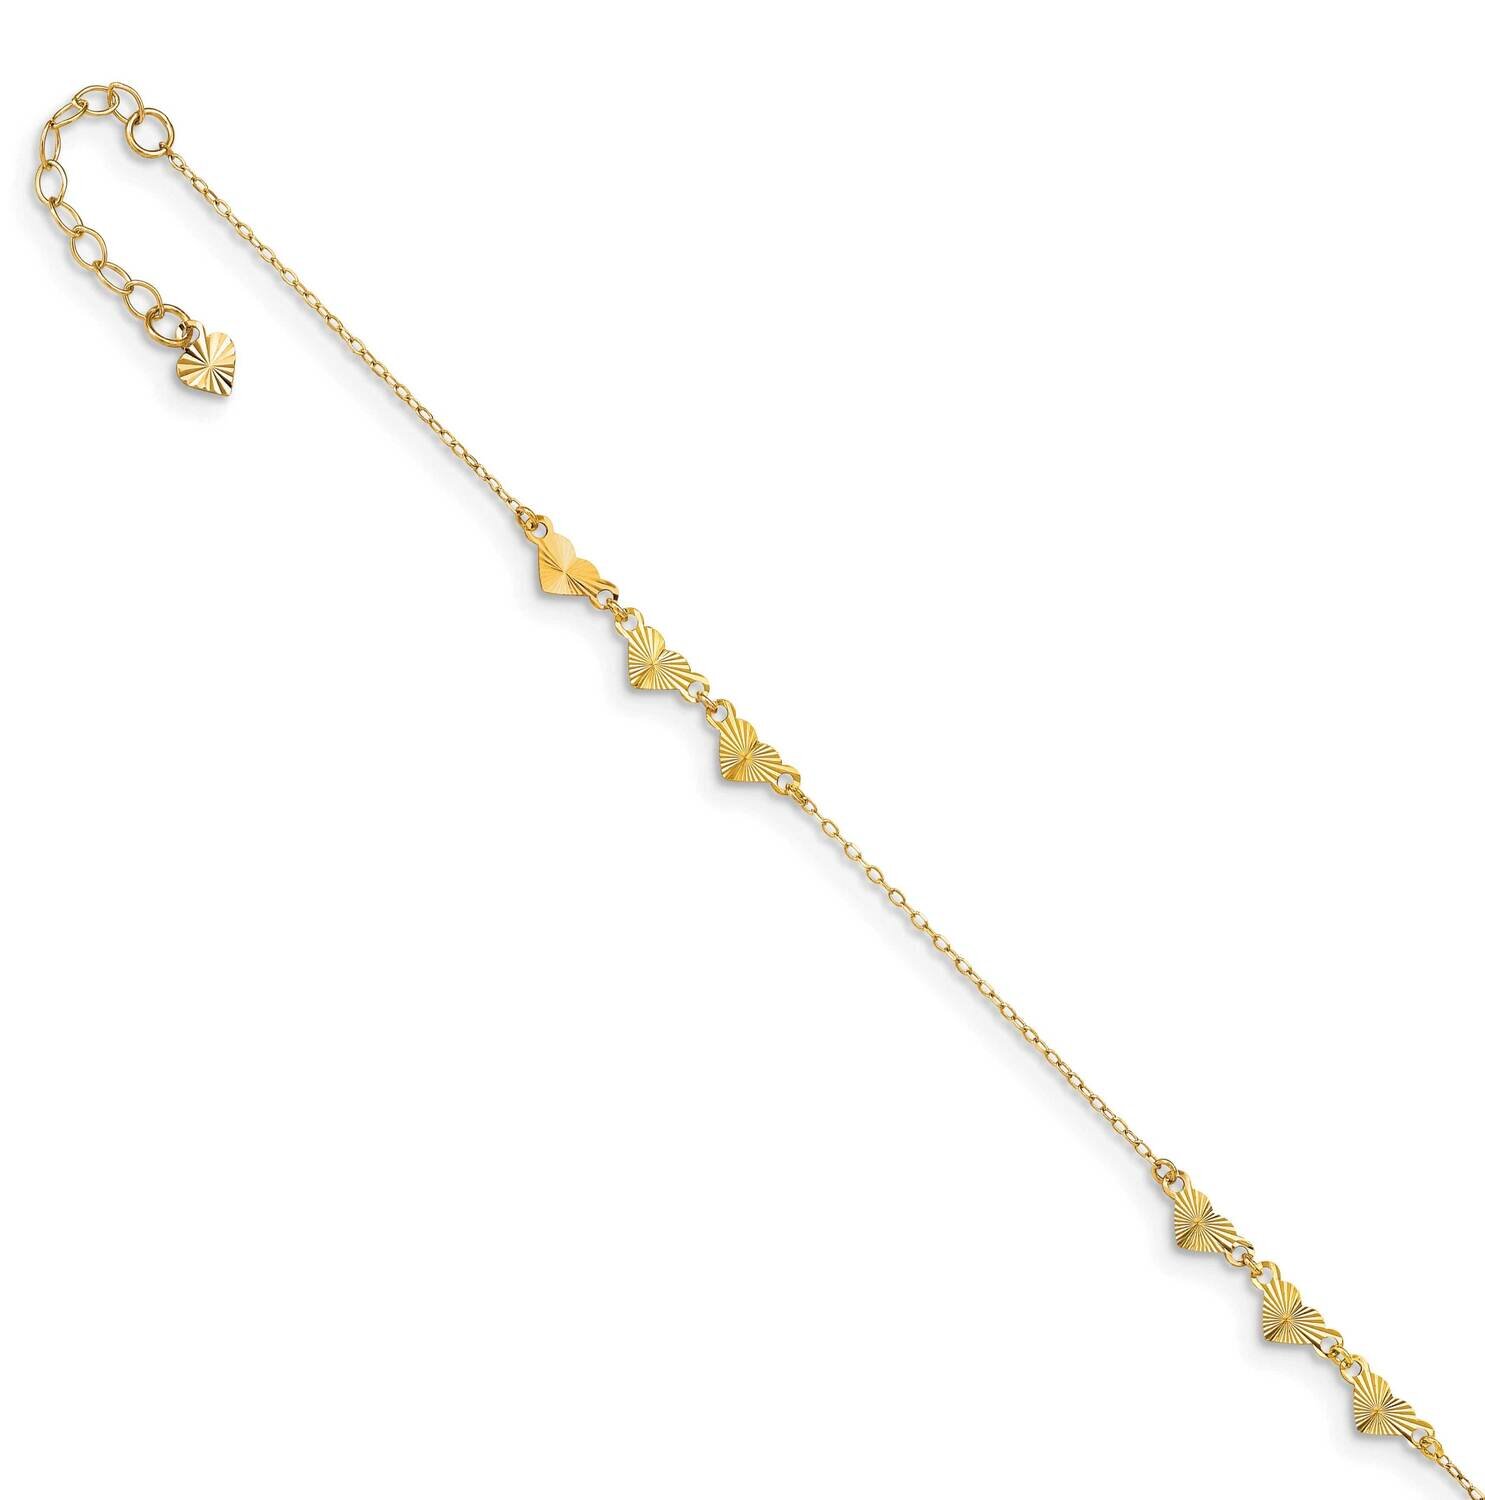 Diamond-Cut Hearts 9 Inch Plus 1 Inch Extender Anklet 14k Gold ANK307-9